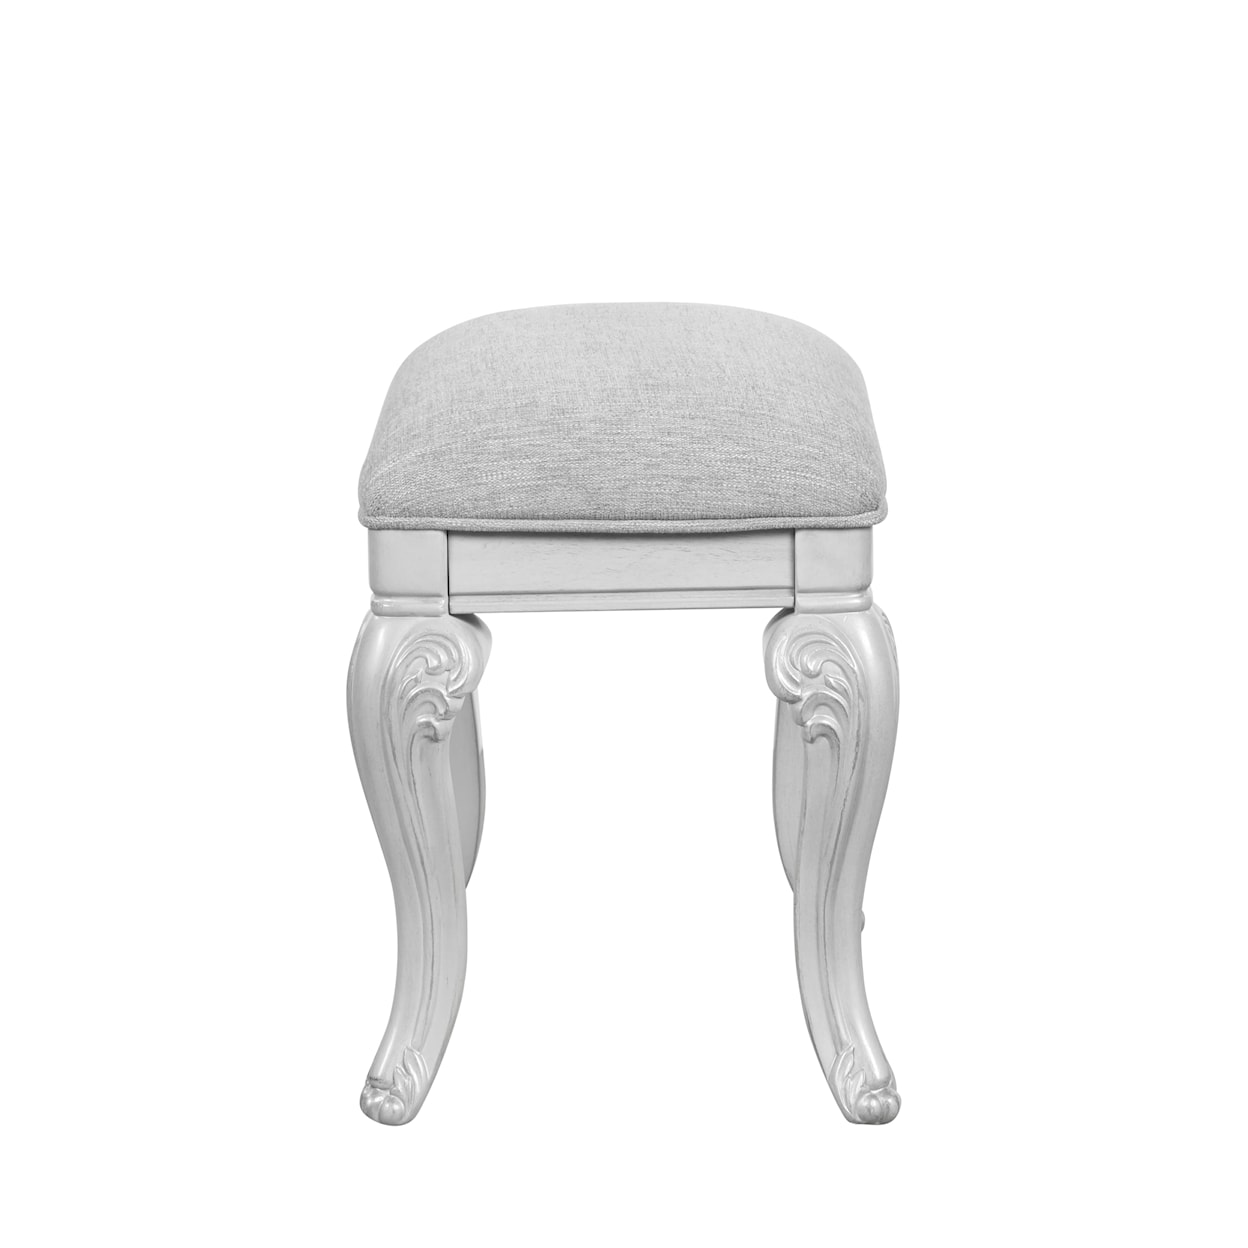 New Classic Furniture Cambria Hills Upholstered Rectangular Vanity Stool